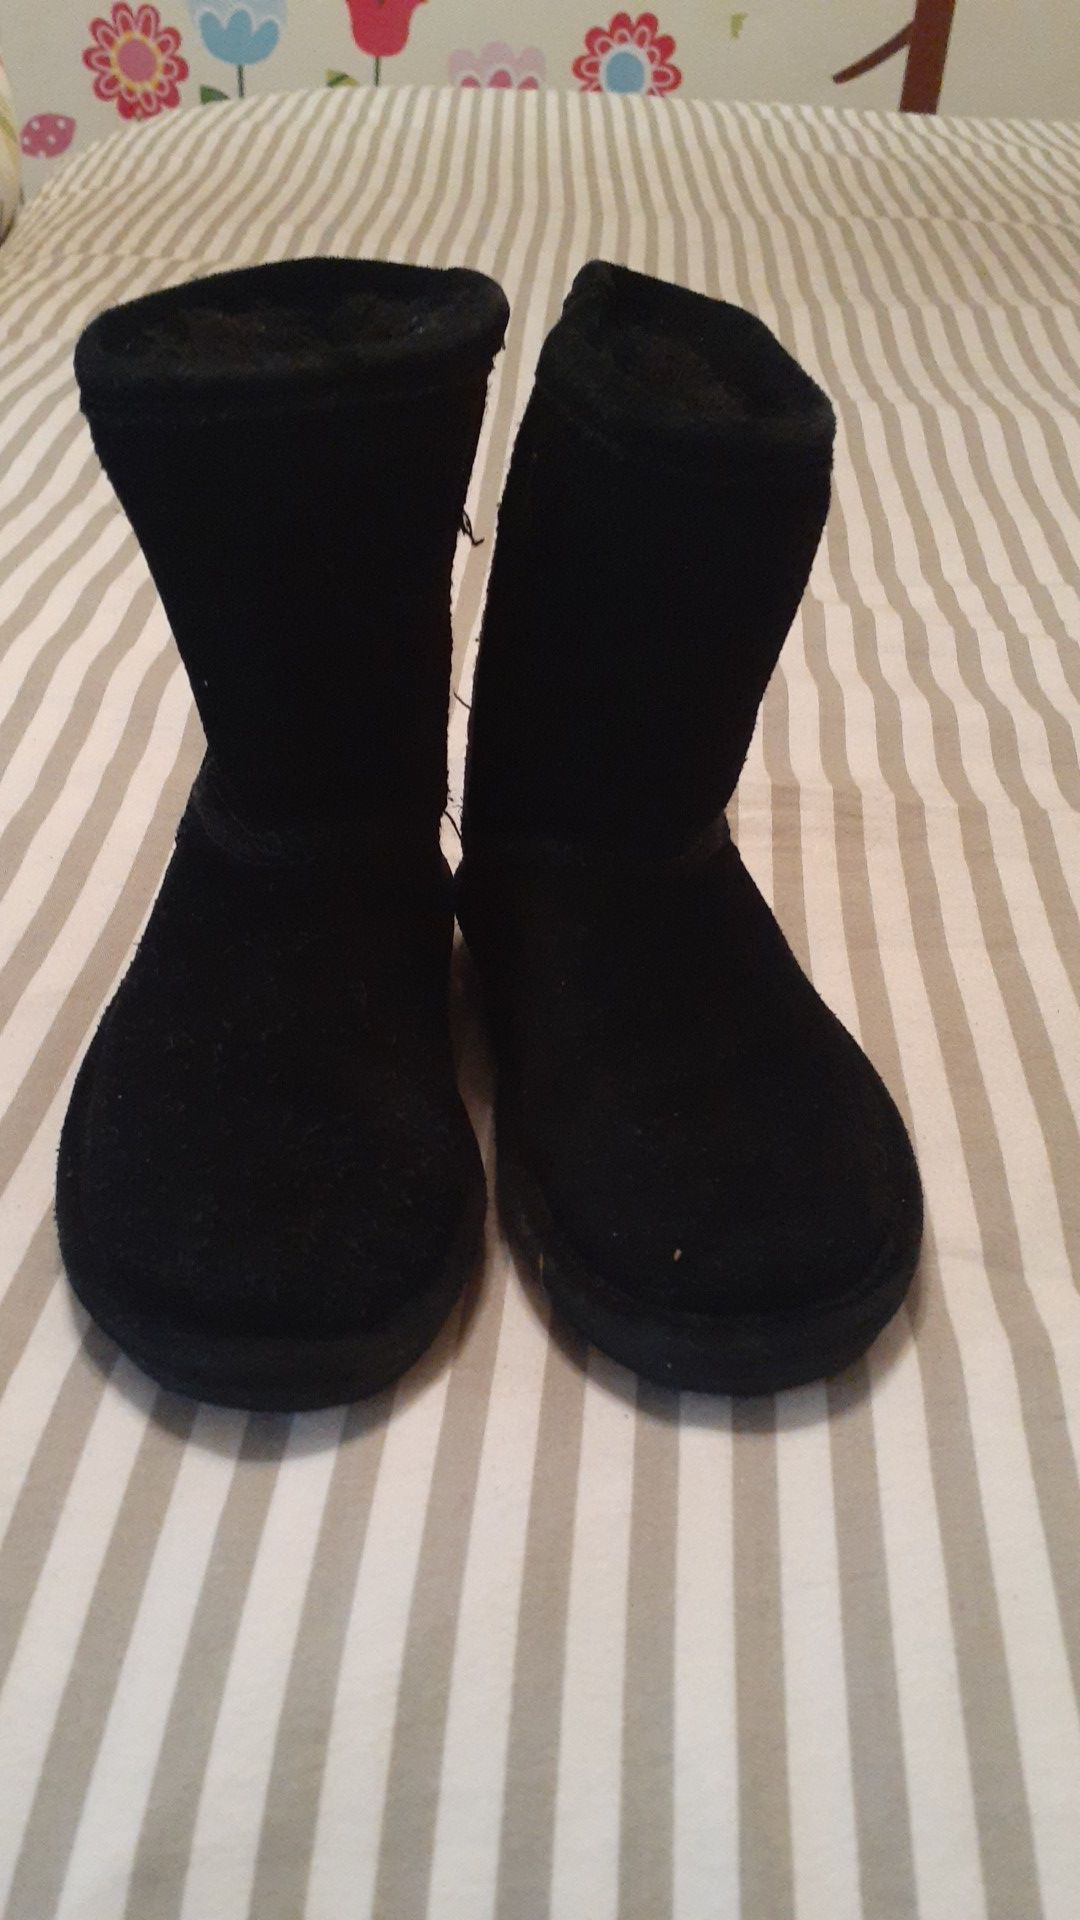 Girl shoes (boots) size 8t